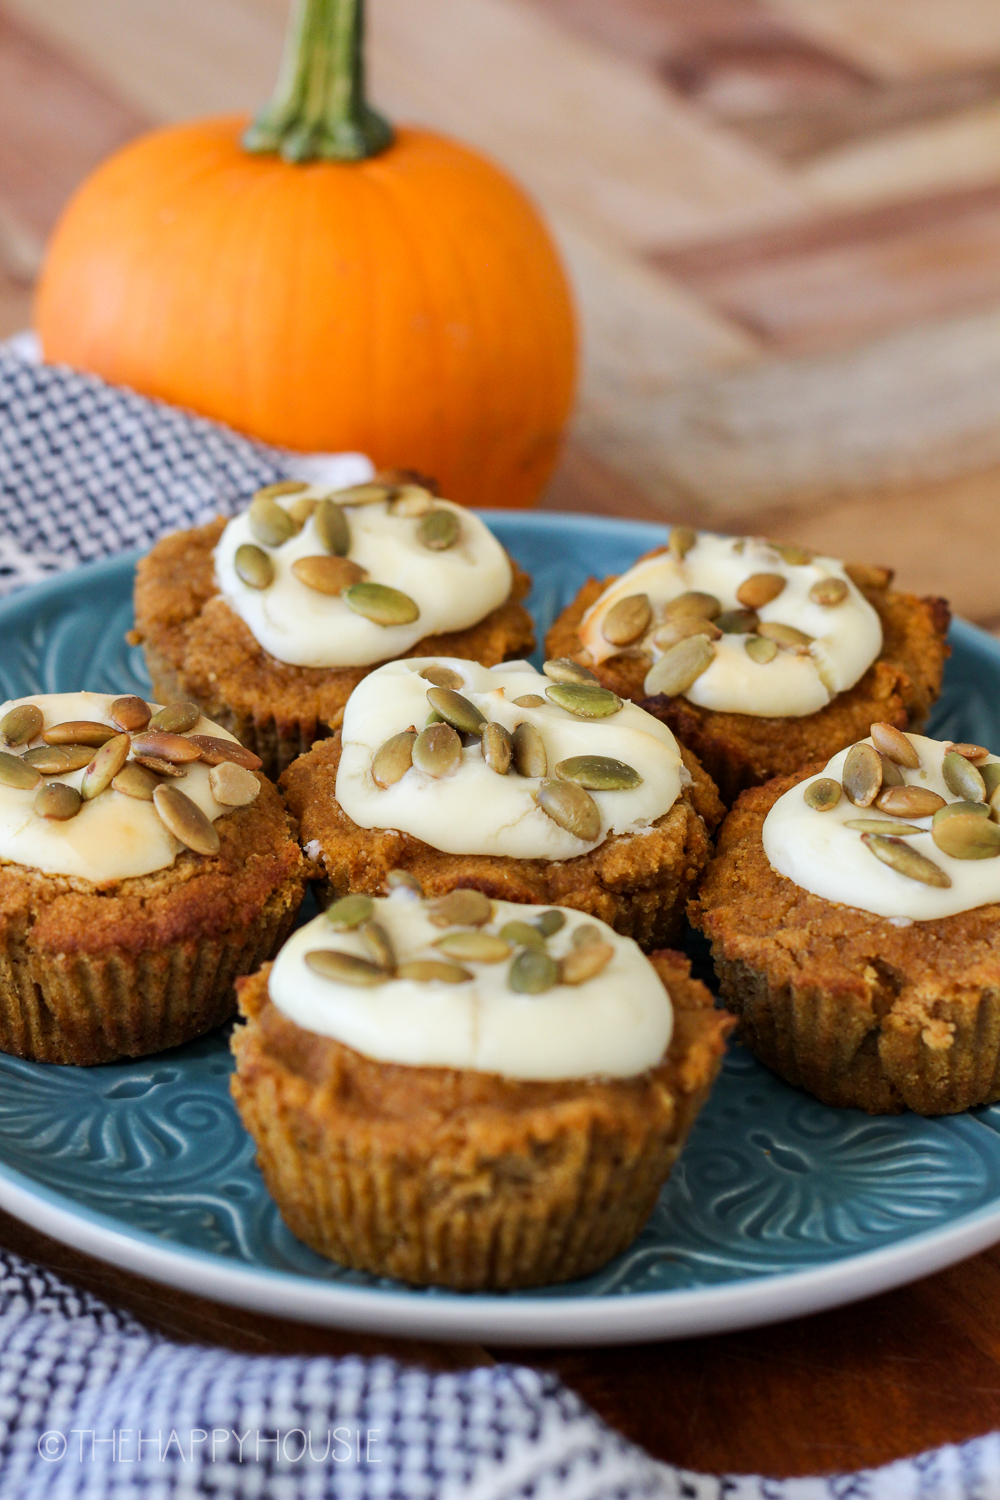 Muffins topped with pumpkin seeds.